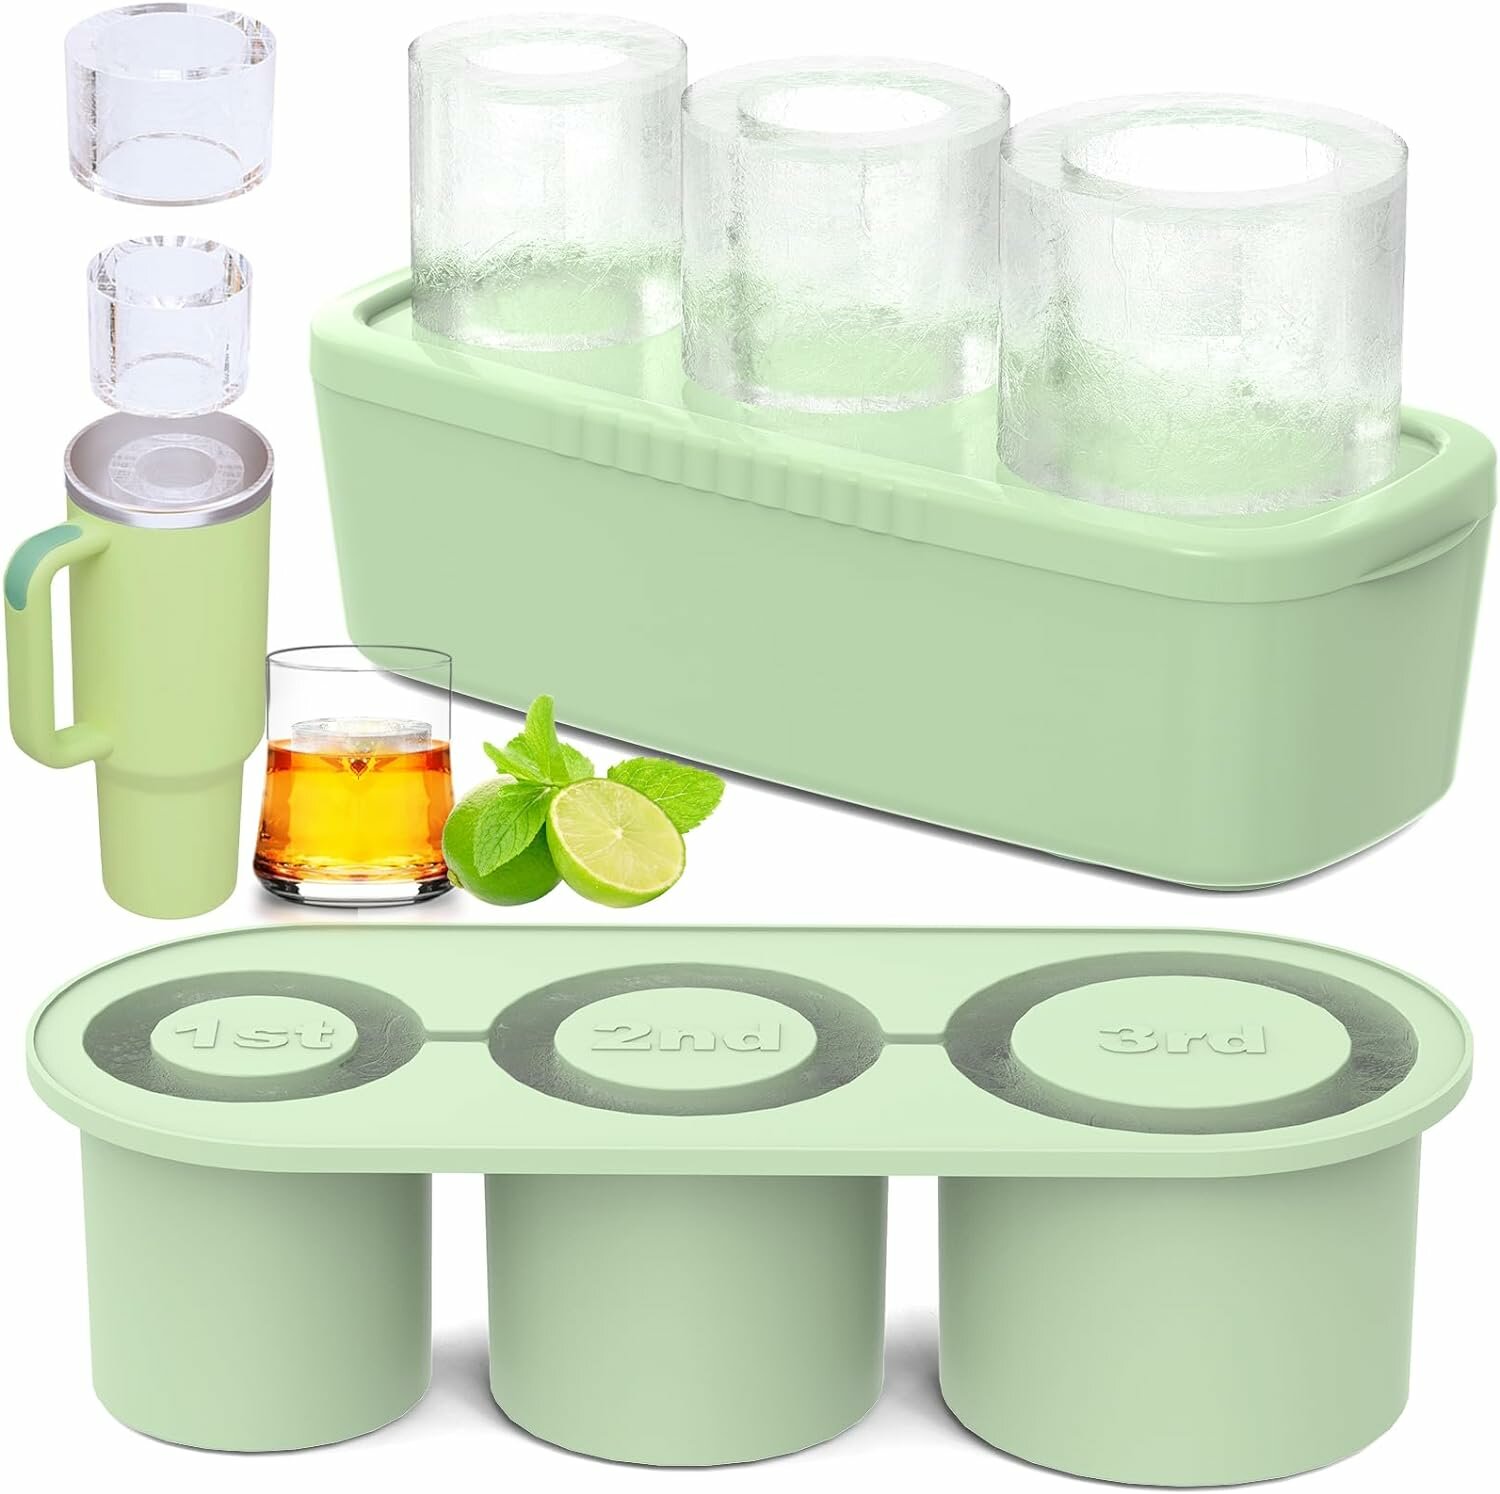 

3 Pcs Silicone Ice Cube Tray for Tumbler, Hollow Cylinder Ice Mold with Lid and Bin for Freezer Ice Drink Juice Whiskey